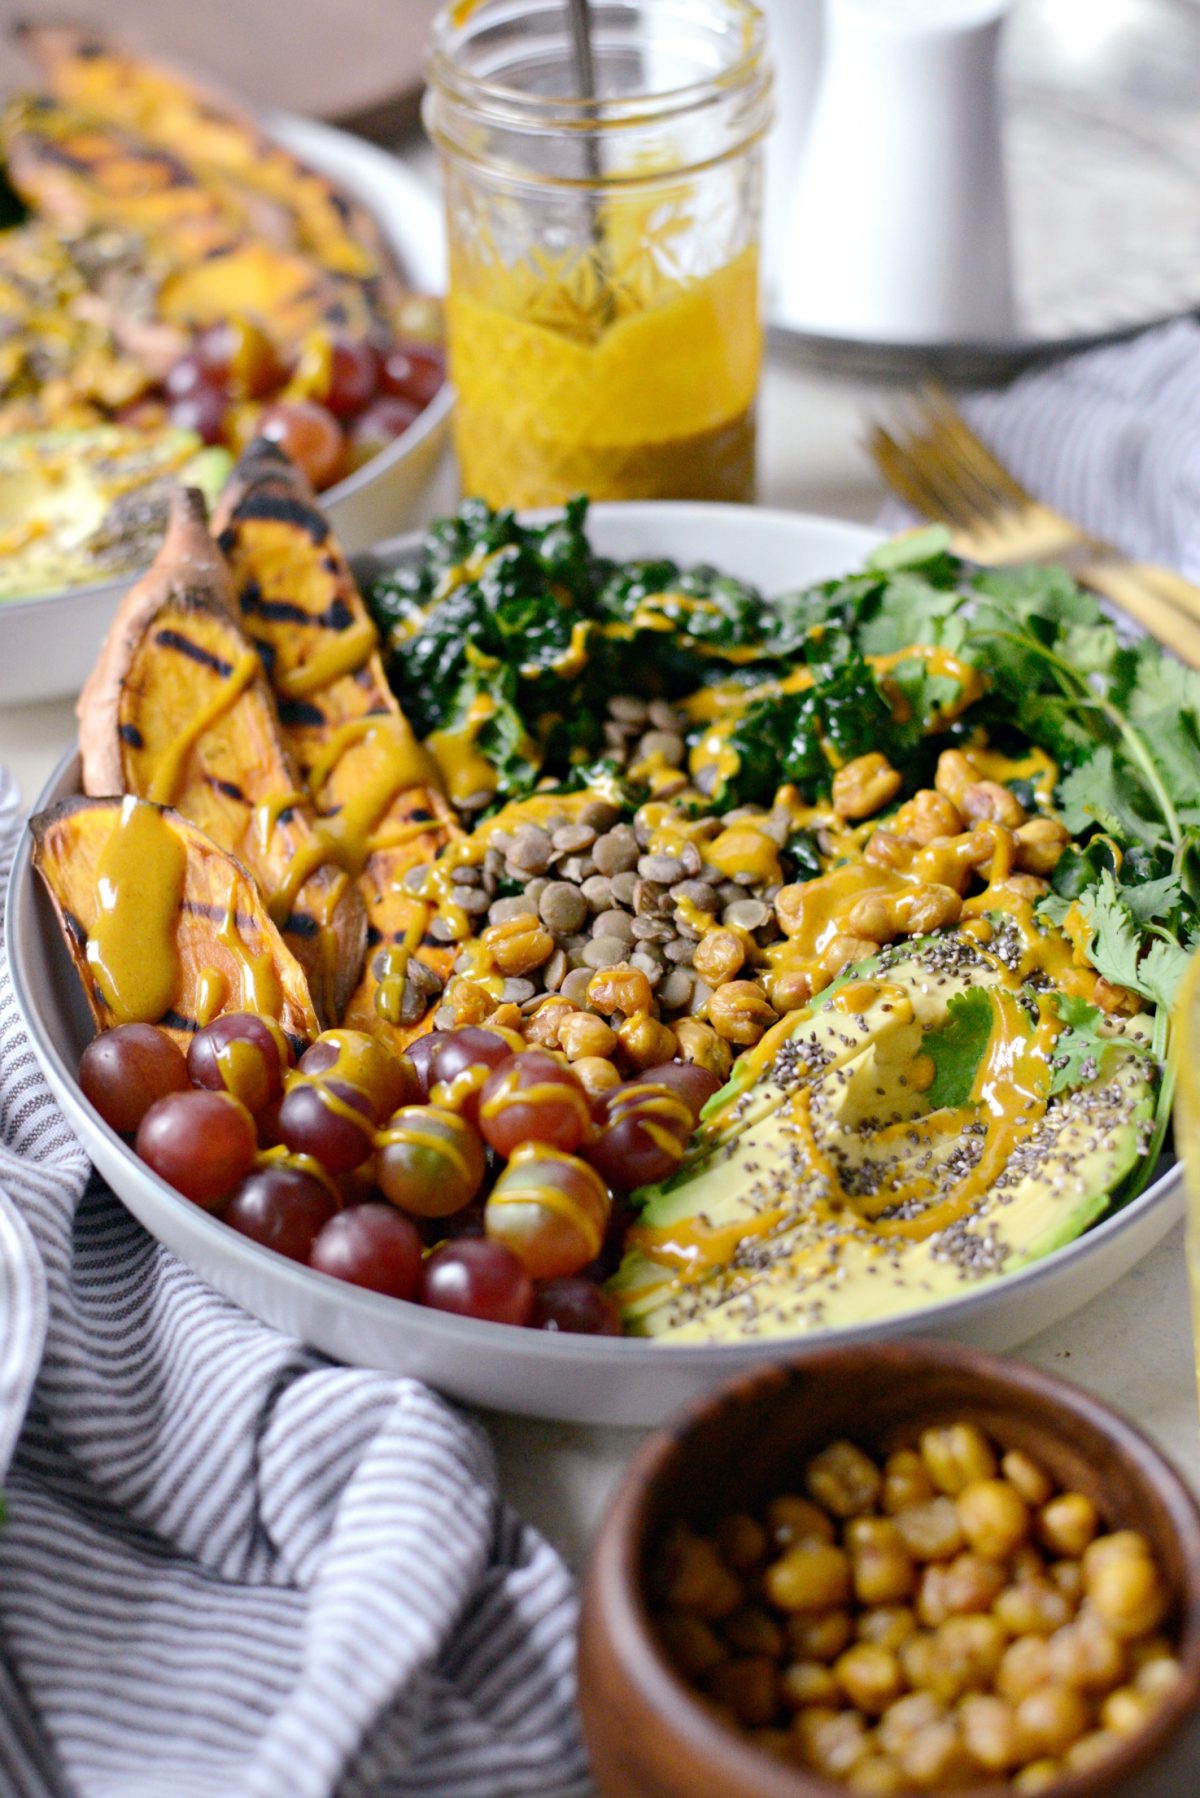 Grilled Sweet Potato, Lentil and Kale Buddha Bowl with Golden Almond Butter Dressing l SimplyScratch.com (17)